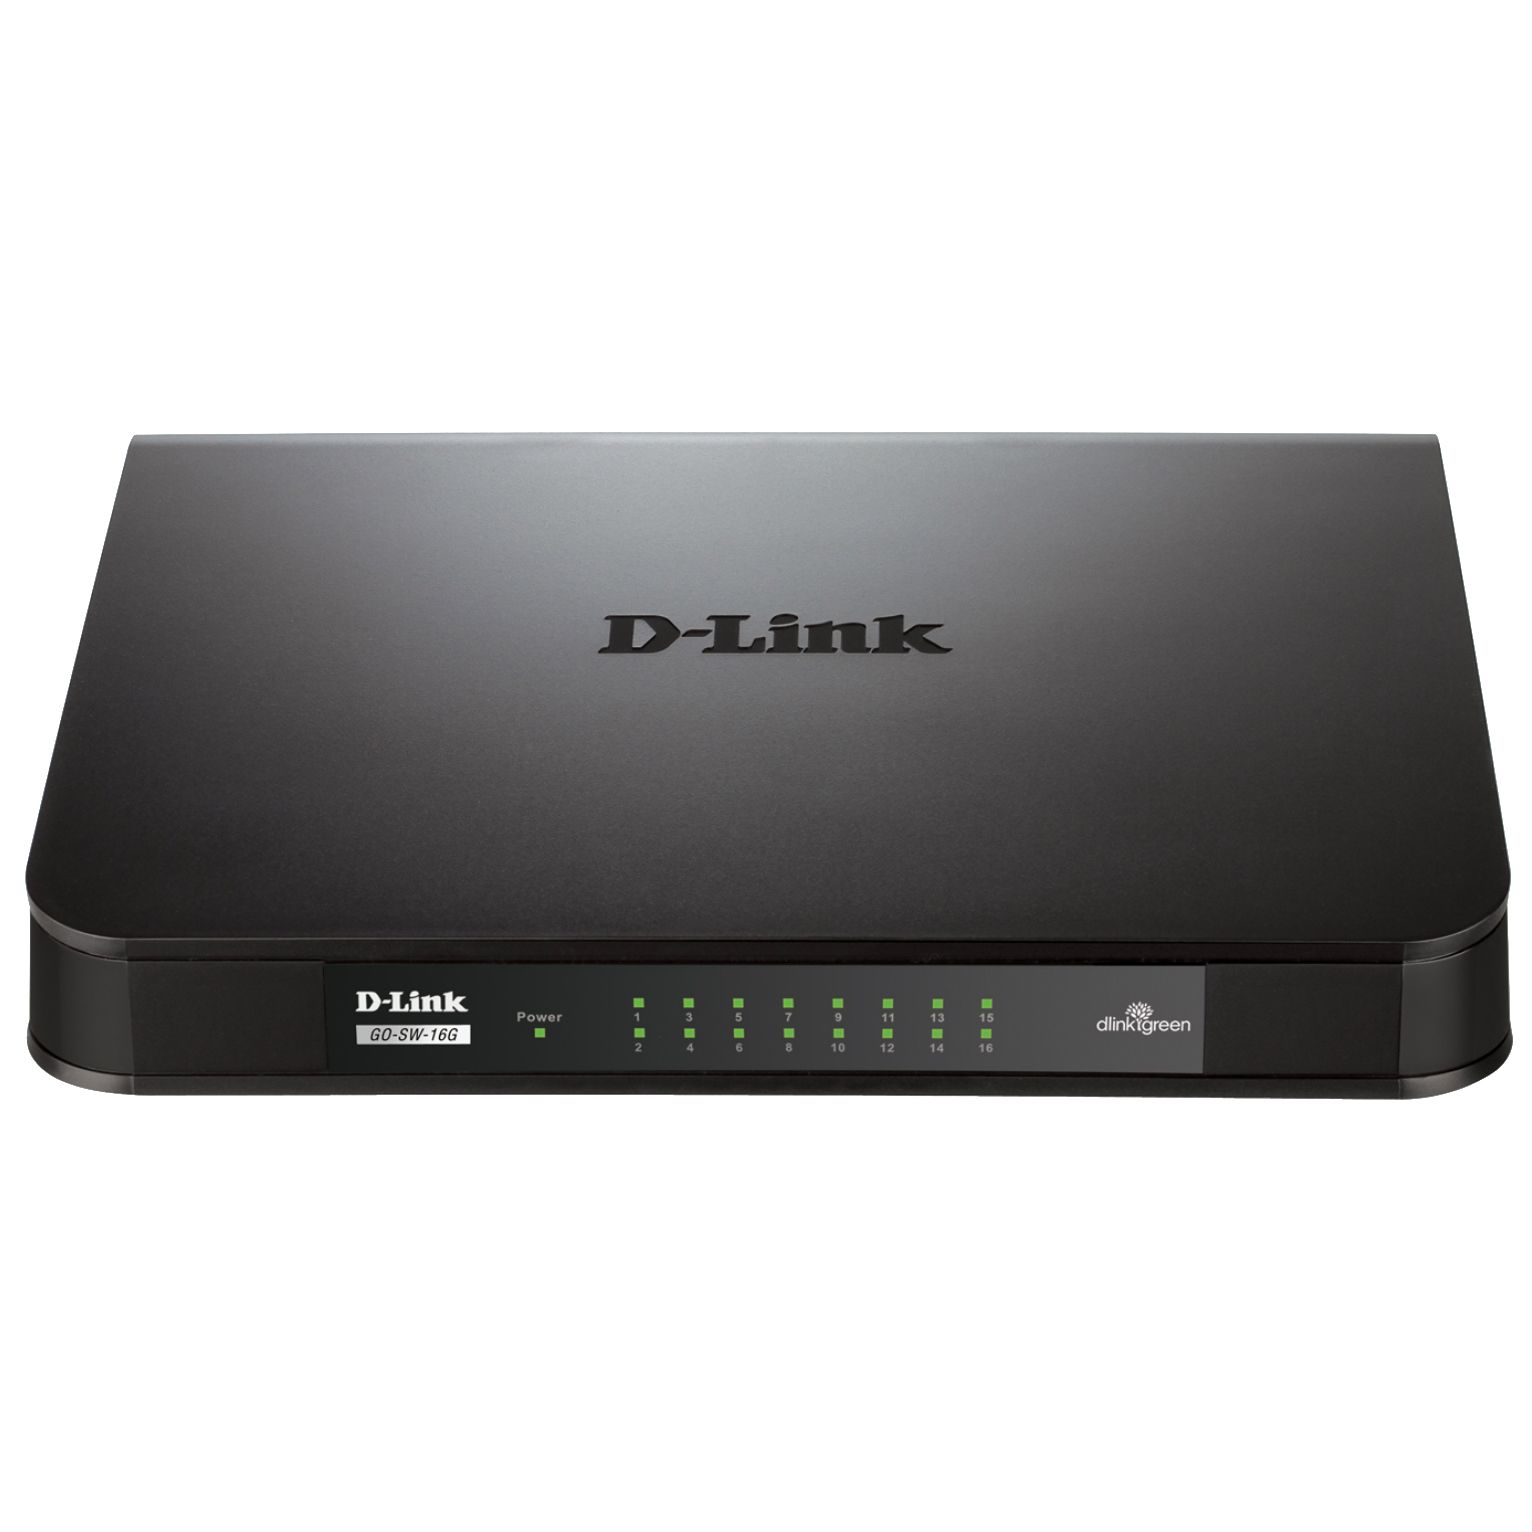  Switch D-link GO-SW-16G 